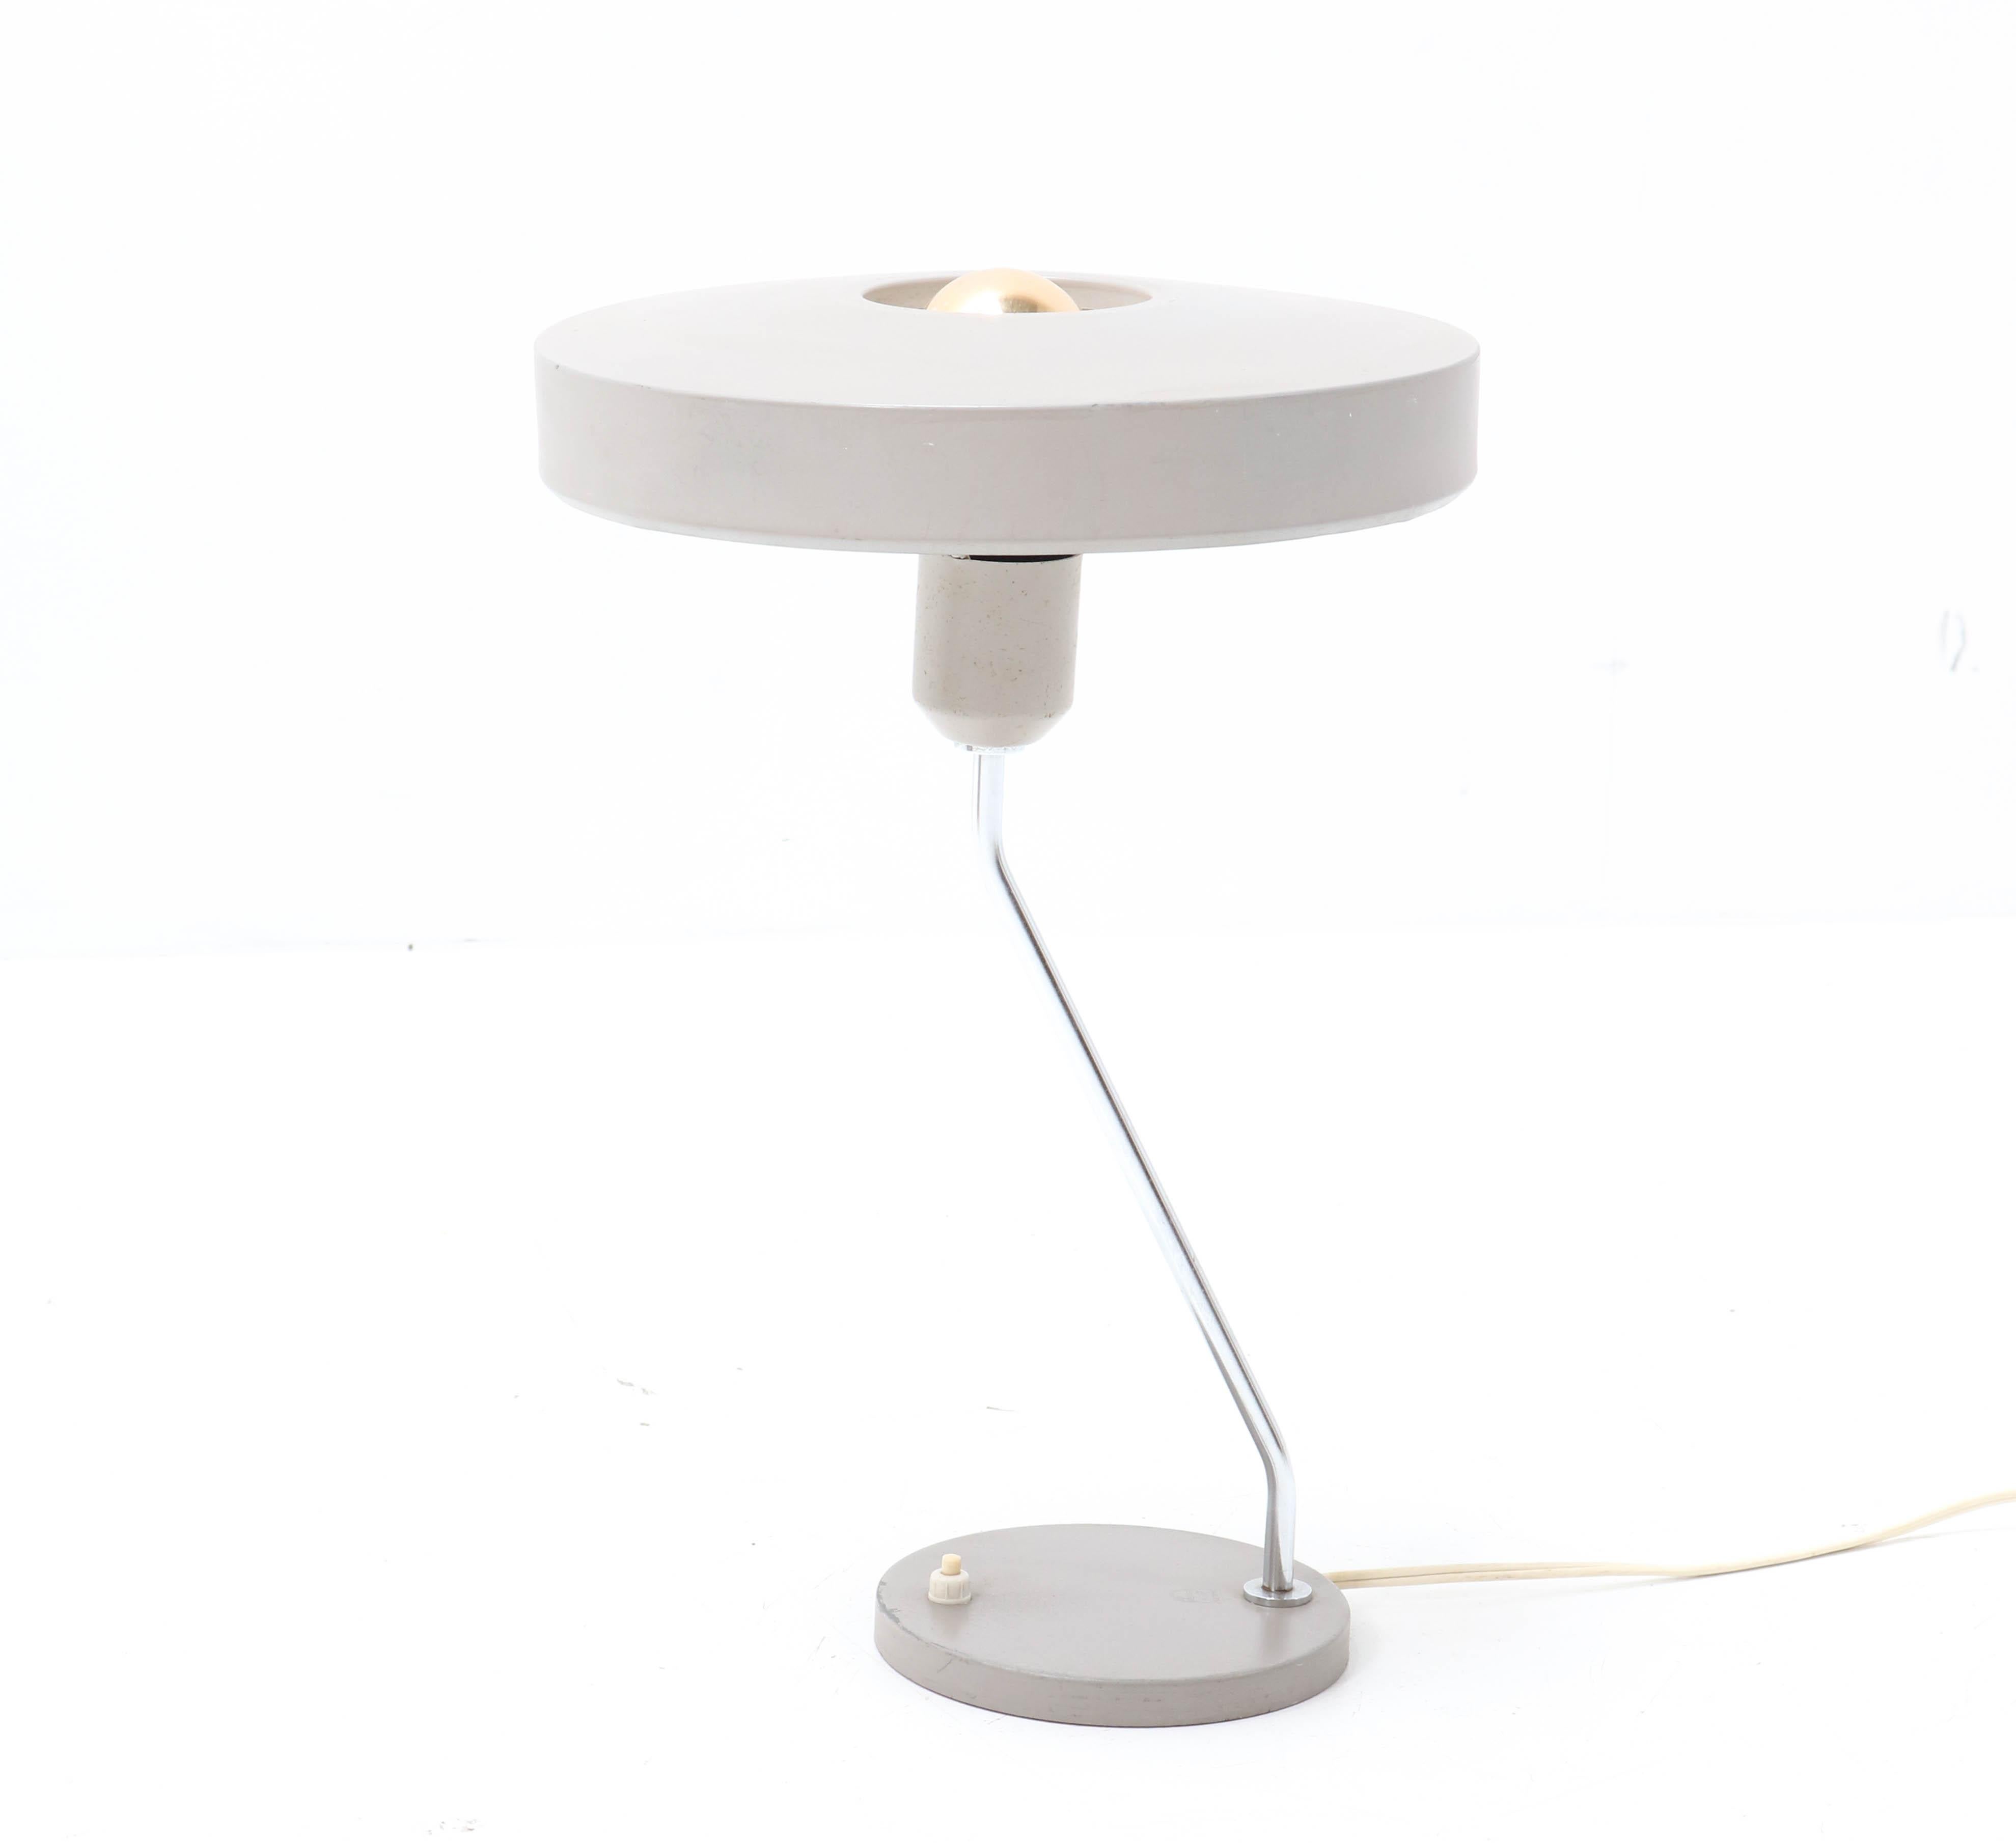 Stunning Mid-Century Modern table lamp or desk lamp.
Design by Louis Kalff for Philips.
Striking Dutch design from the 1960s.
Grey lacquered metal disc shaped shade and base with a chrome stem.
Marked with the original Philips label.
Rewired